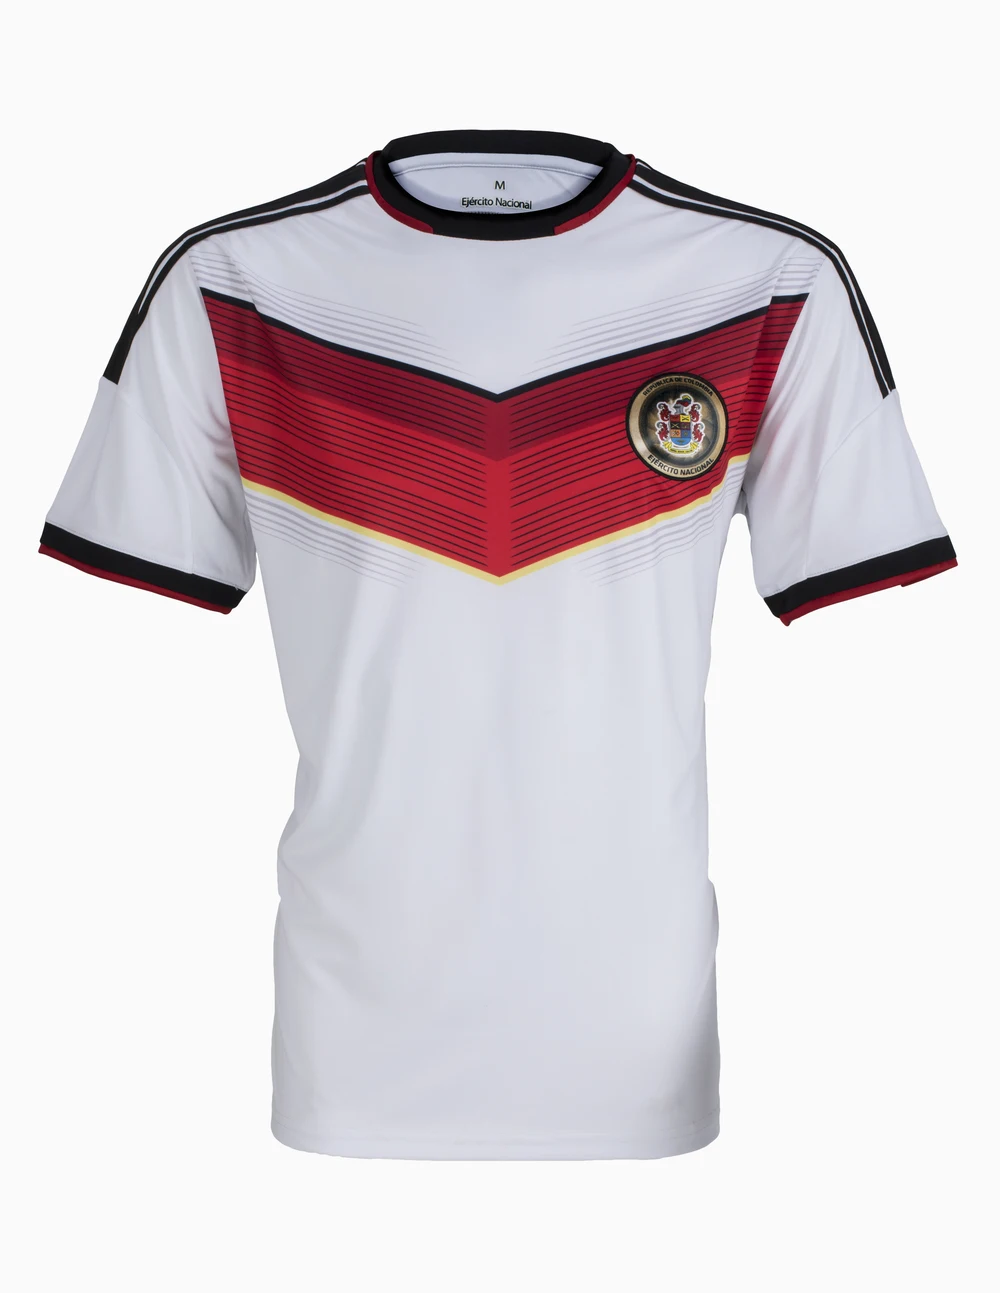 new colombian soccer jersey